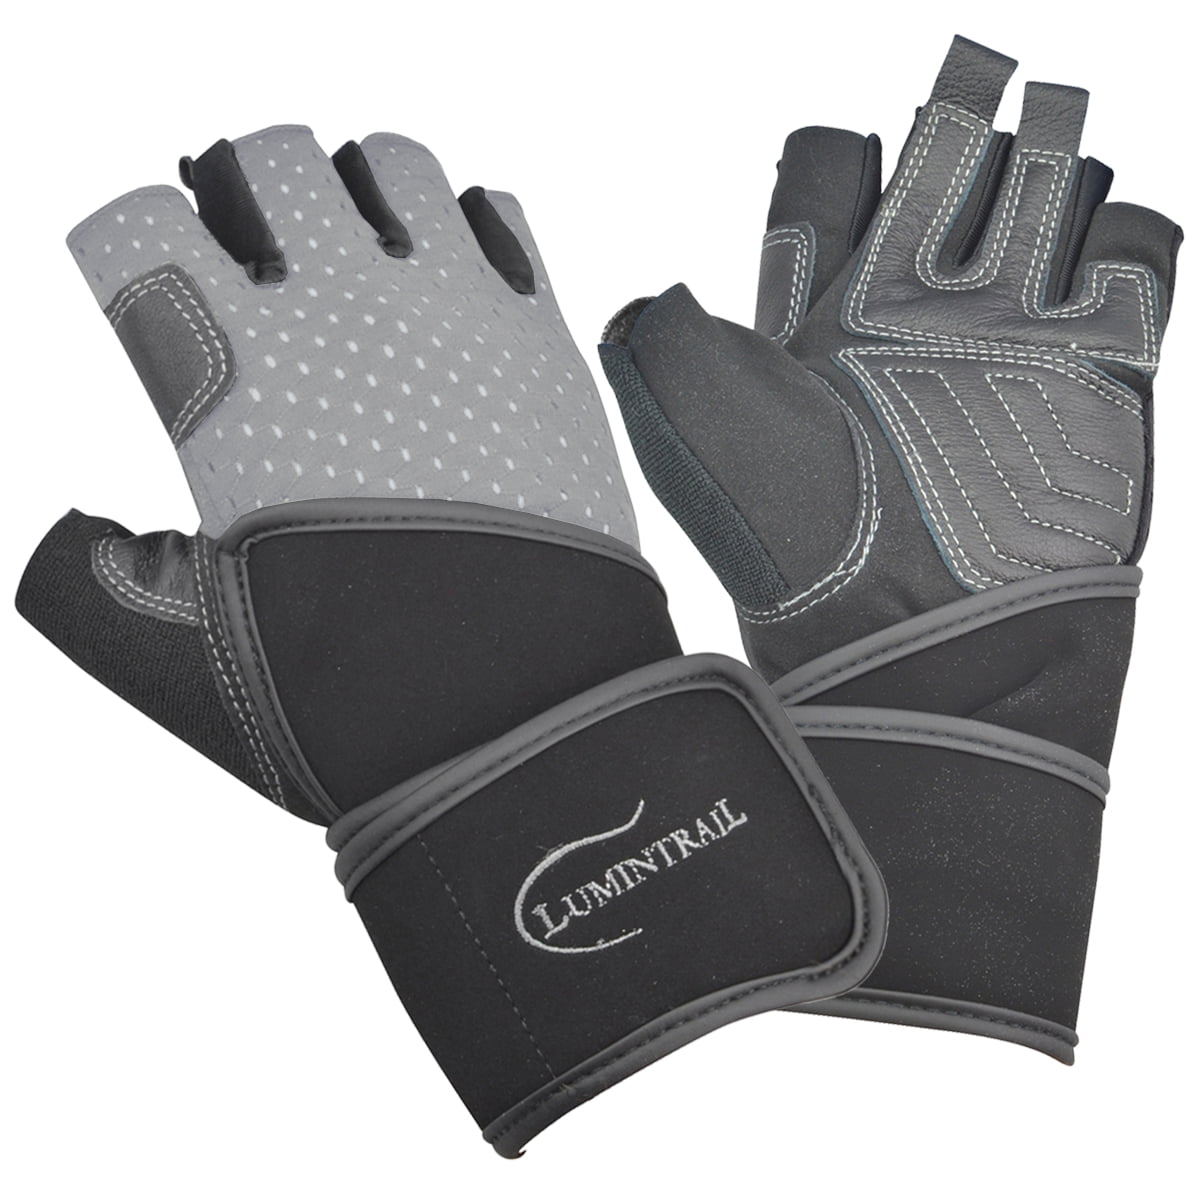 MESH WEIGHT LIFTING PADDED LEATHER GLOVES TRAINING CYCLING GYM BLACK X-SMALL 